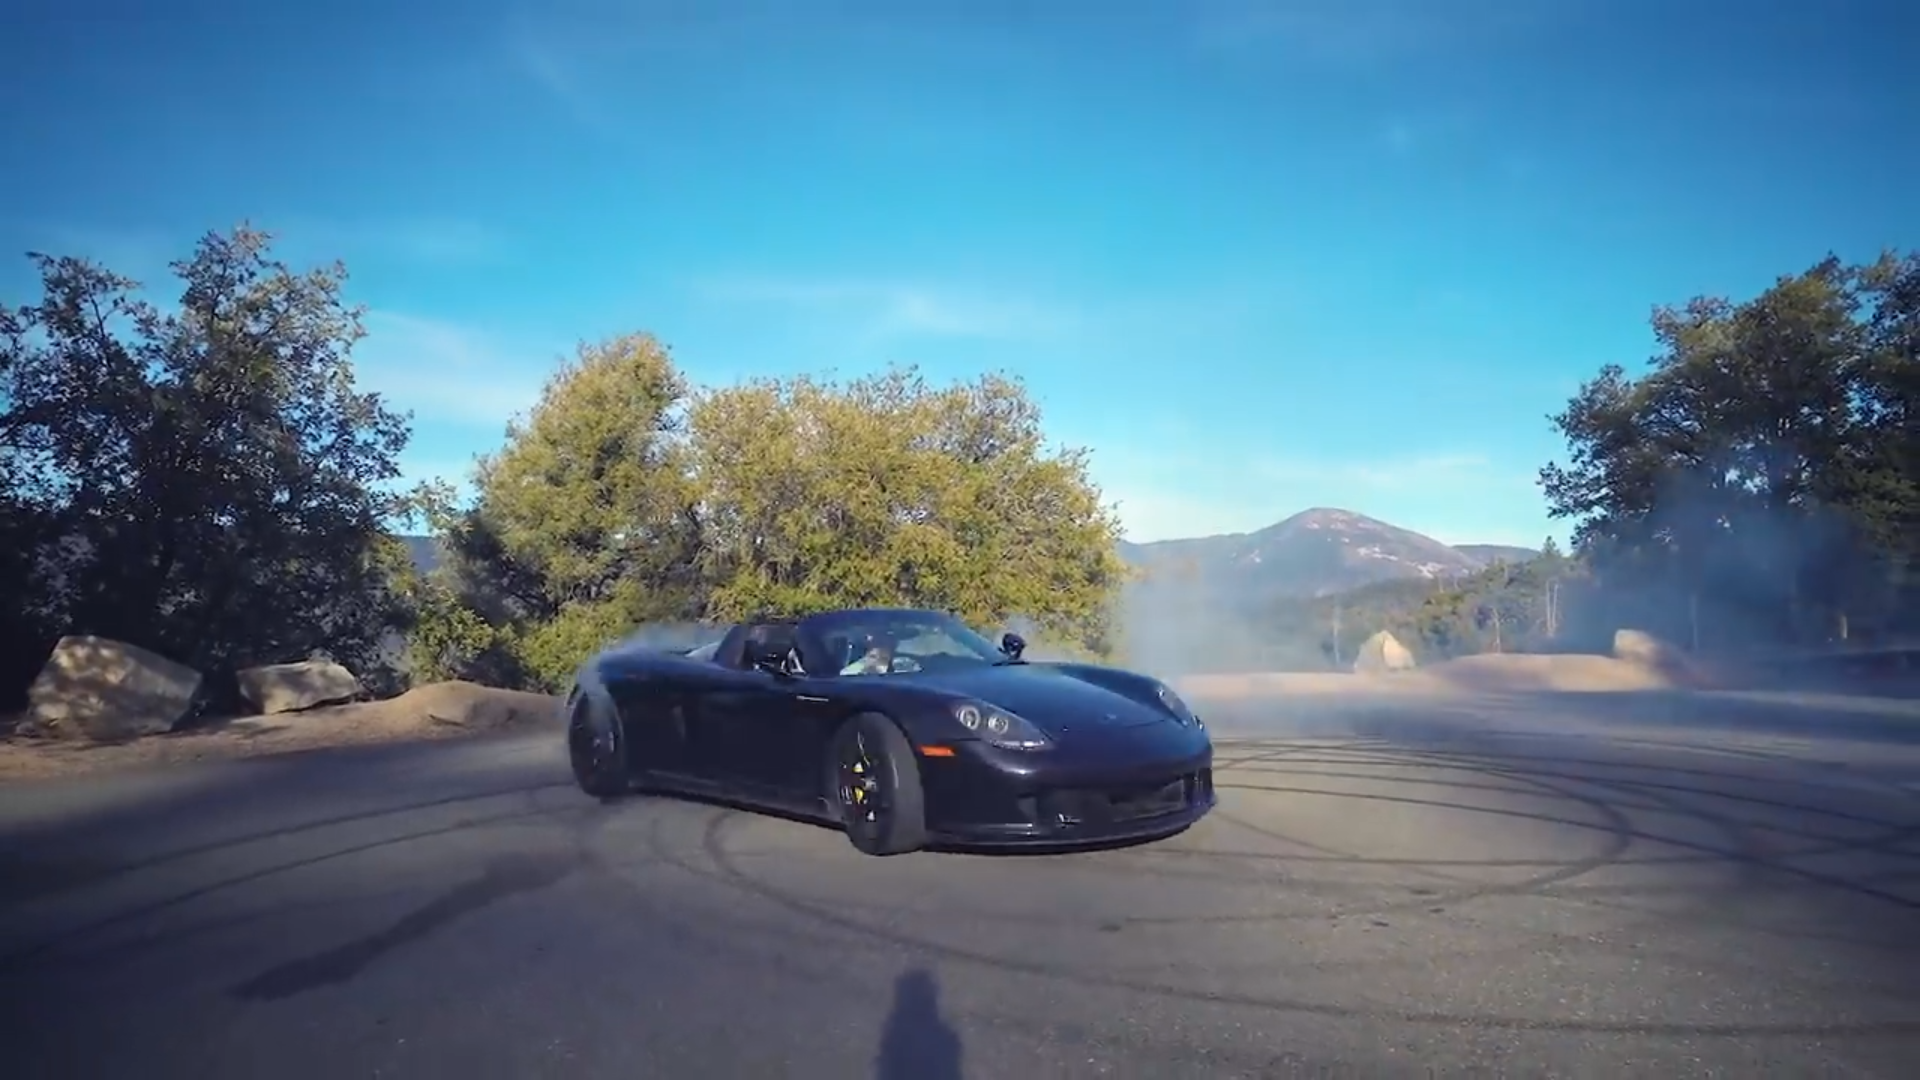 This Straight-Piped Porsche Carrera GT Sounds Like Our Favorite F1 Cars of Yesteryear